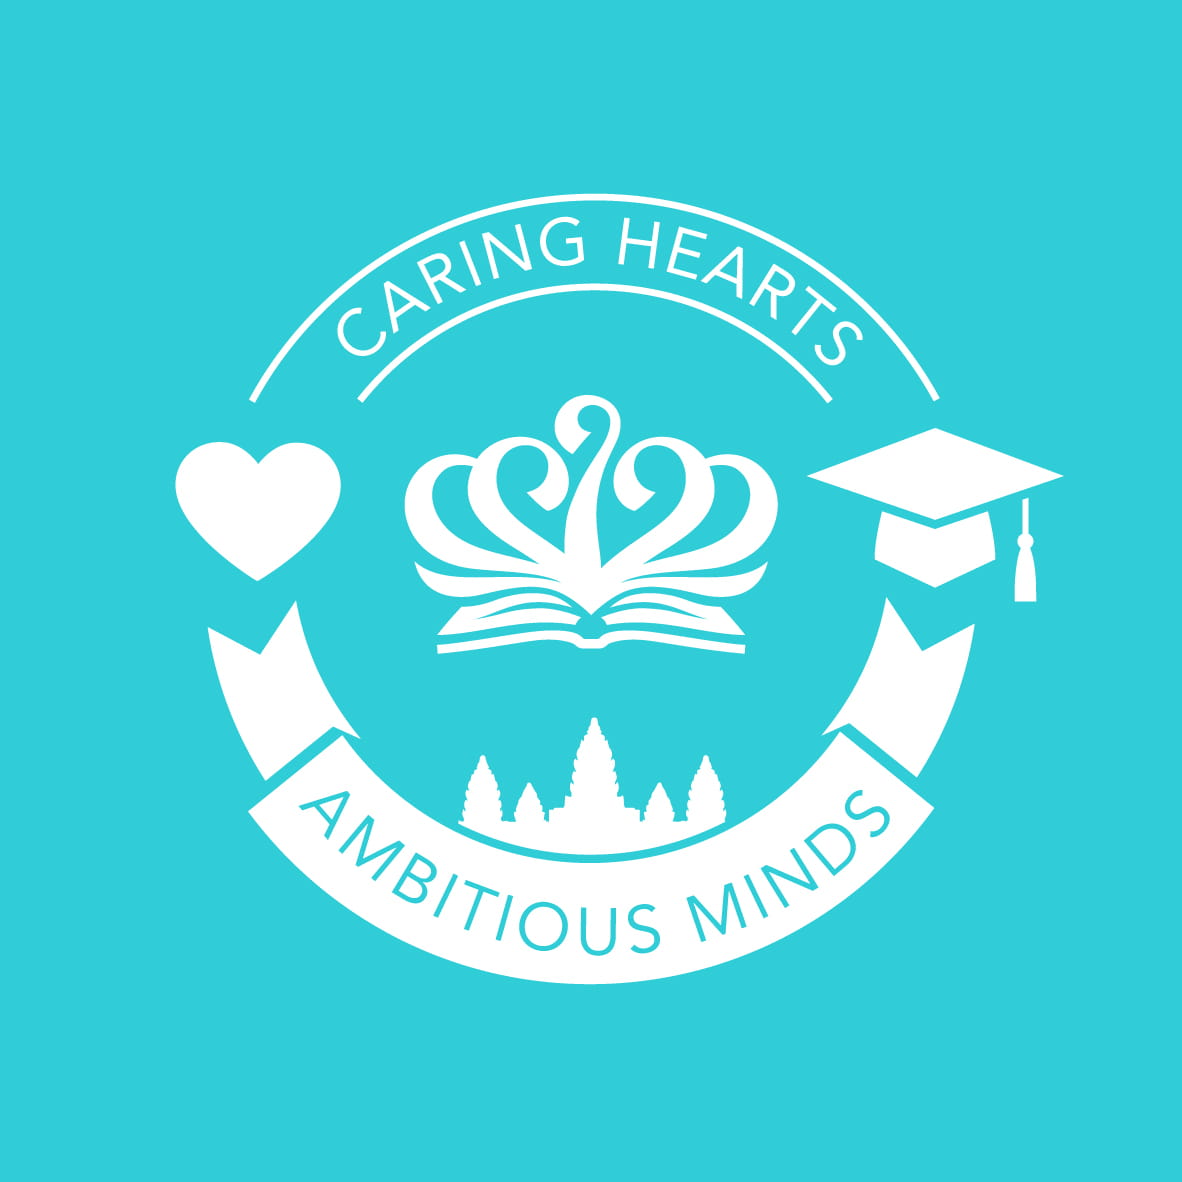 Caring hearts ambitious minds_Teal BG